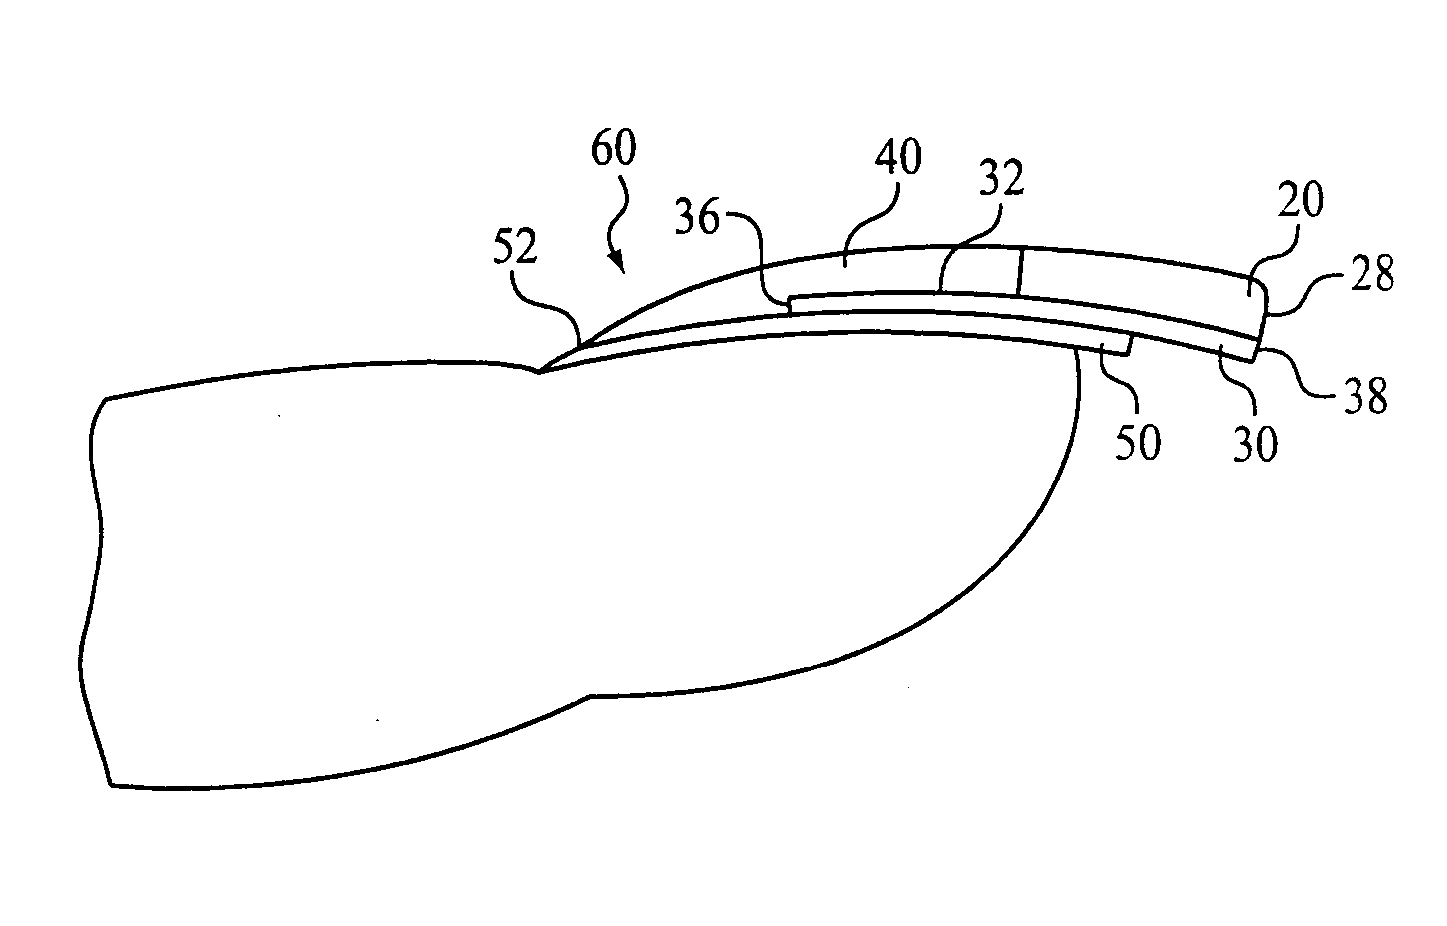 Fingernail accessory and method of forming an artificial fingernail